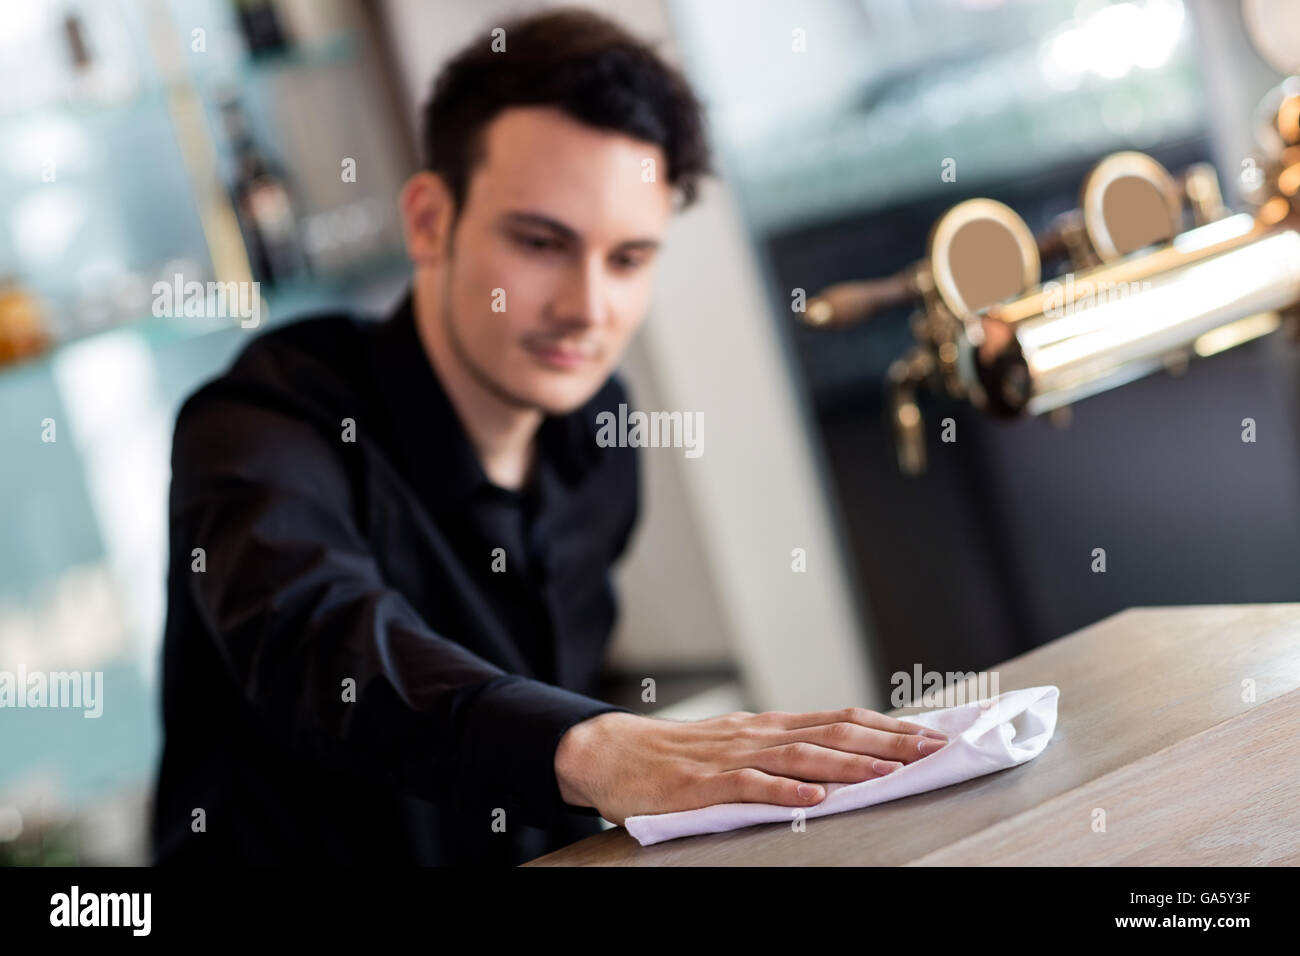 Barkeeper cleaning counter with napkin Stock Photo